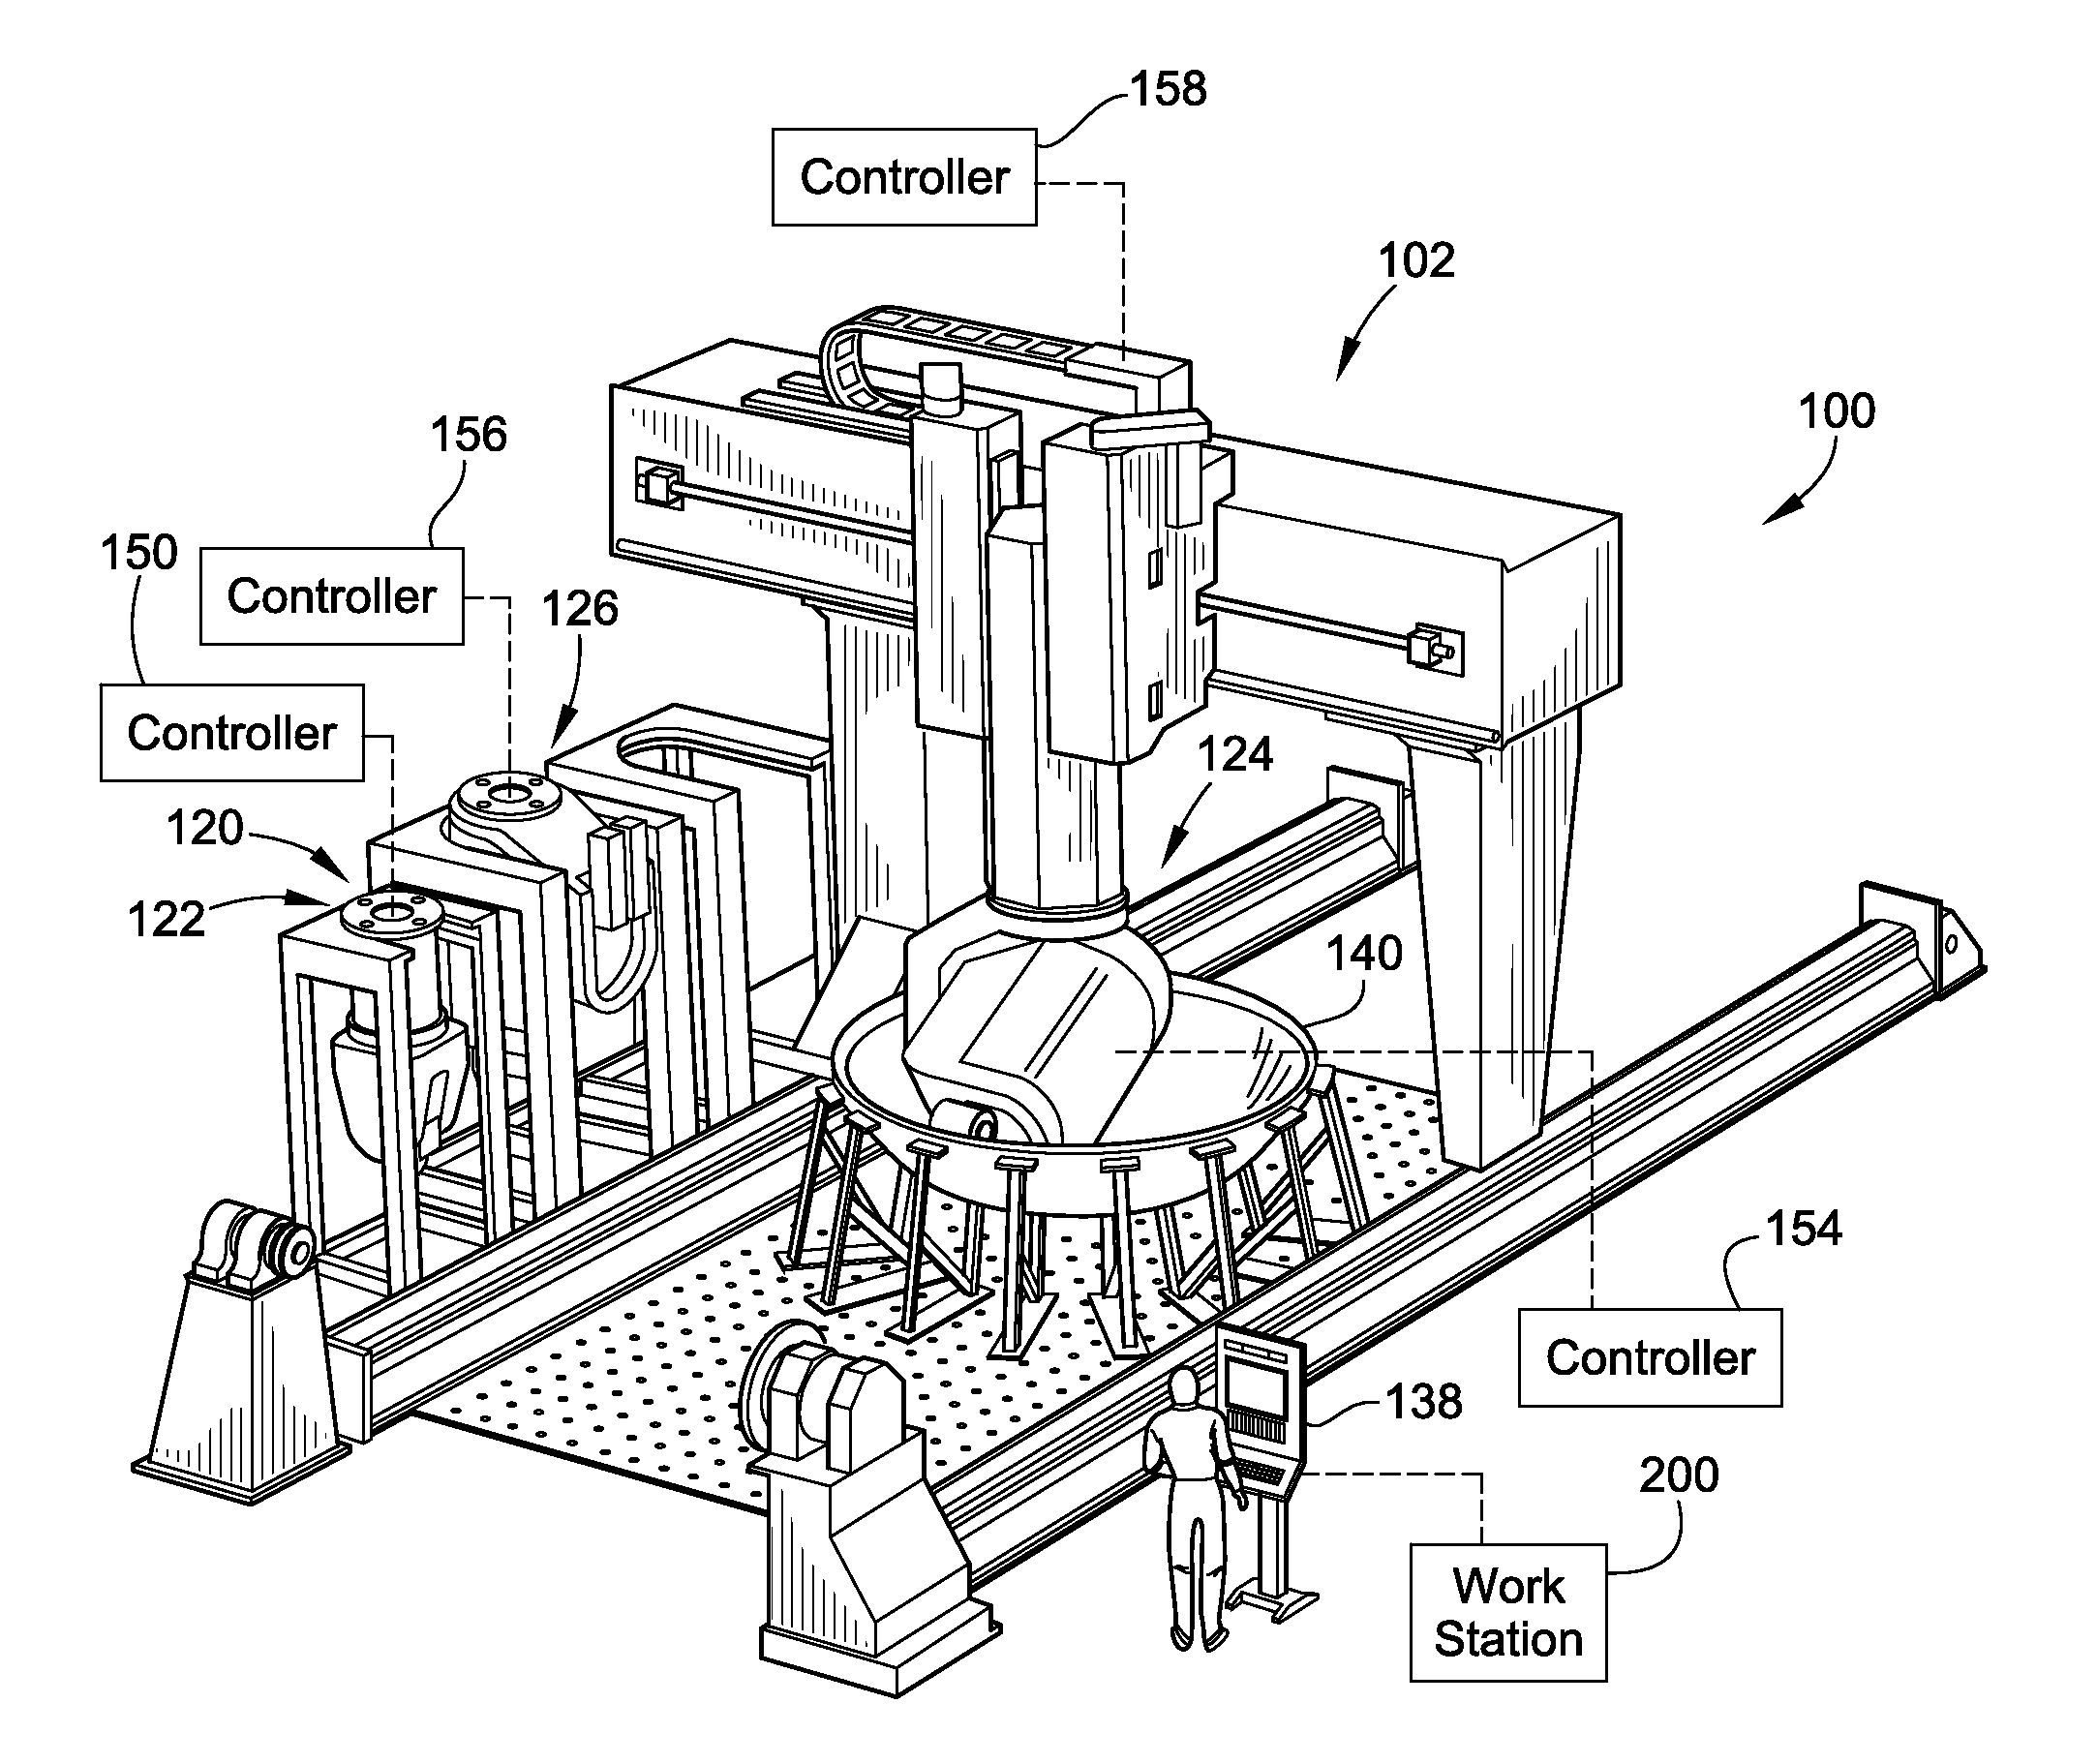 Manufacturing process and apparatus having an interchangeable machine tool head with integrated control